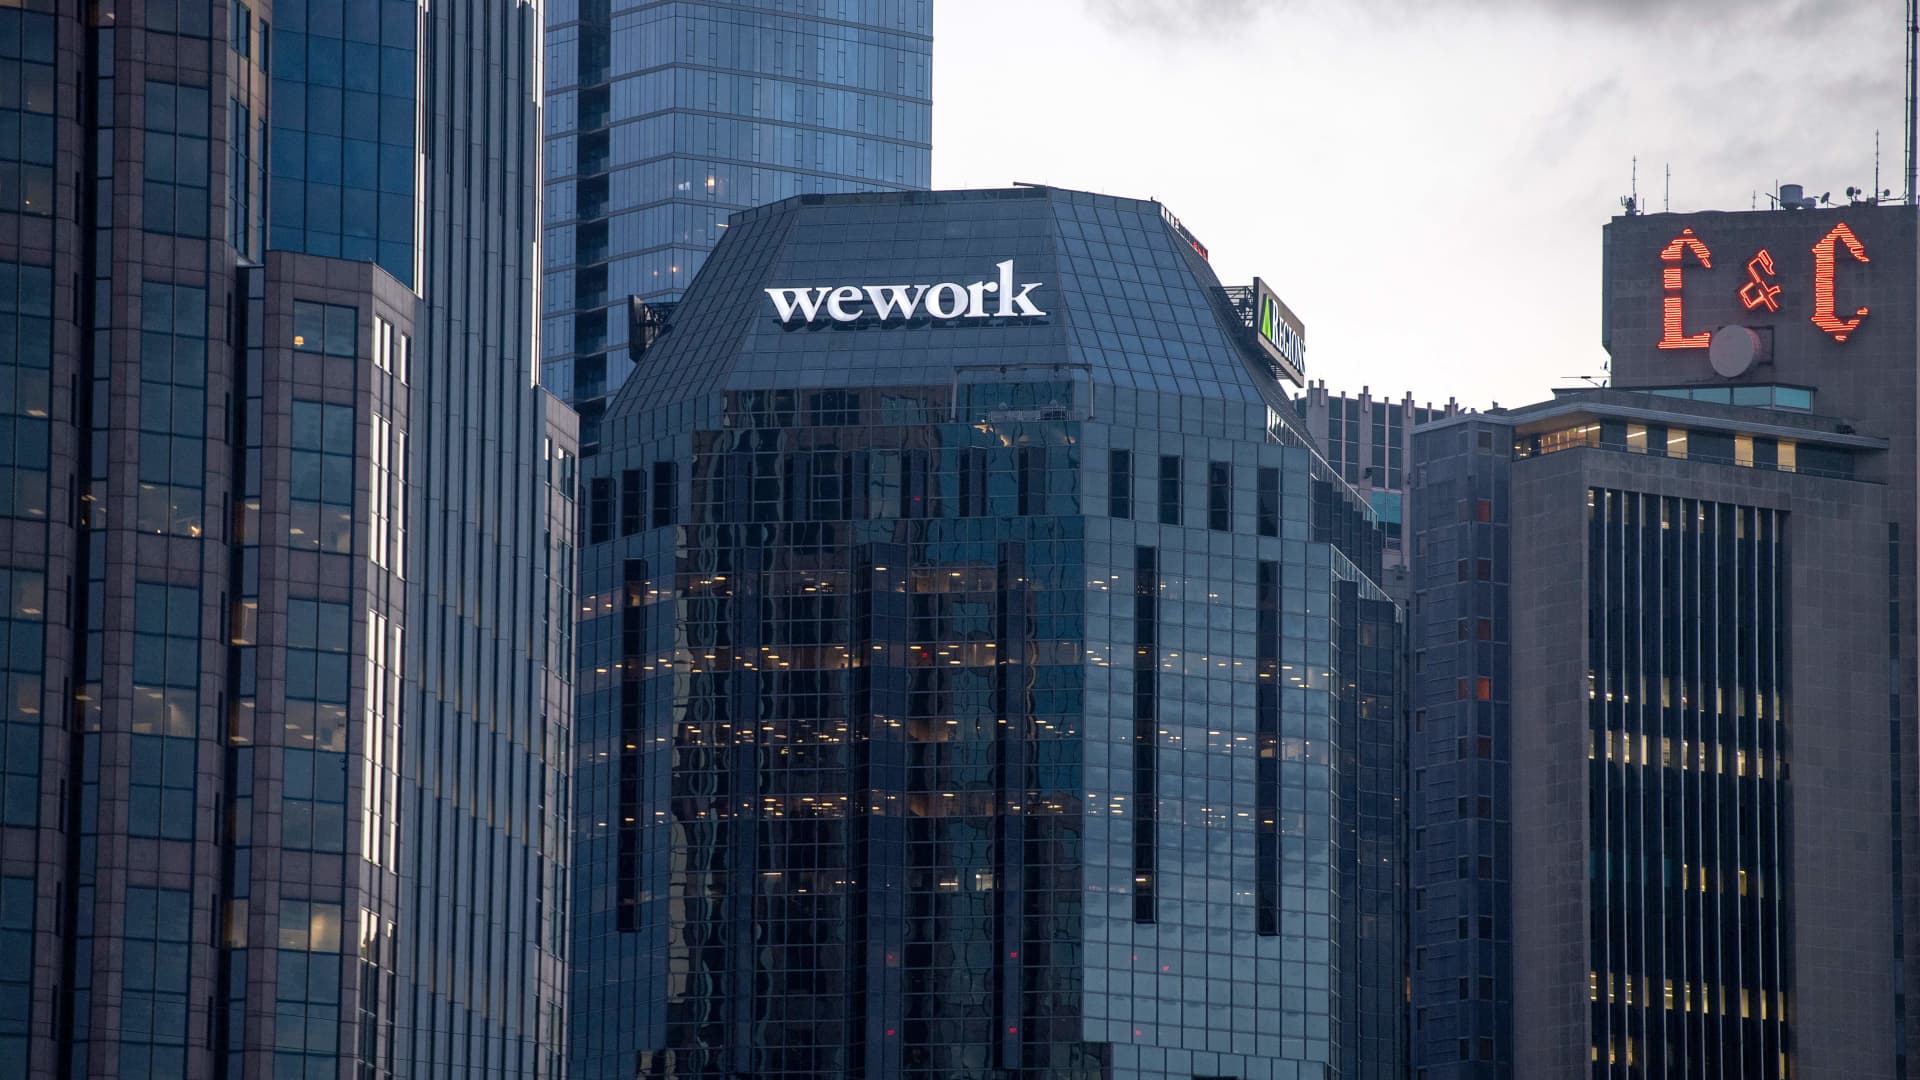 View of the WeWork building in Nashville, Tennessee, on June 16, 2022. (Photo by VALERIE MACON / AFP) (Photo by VALERIE MACON/AFP via Getty Images)